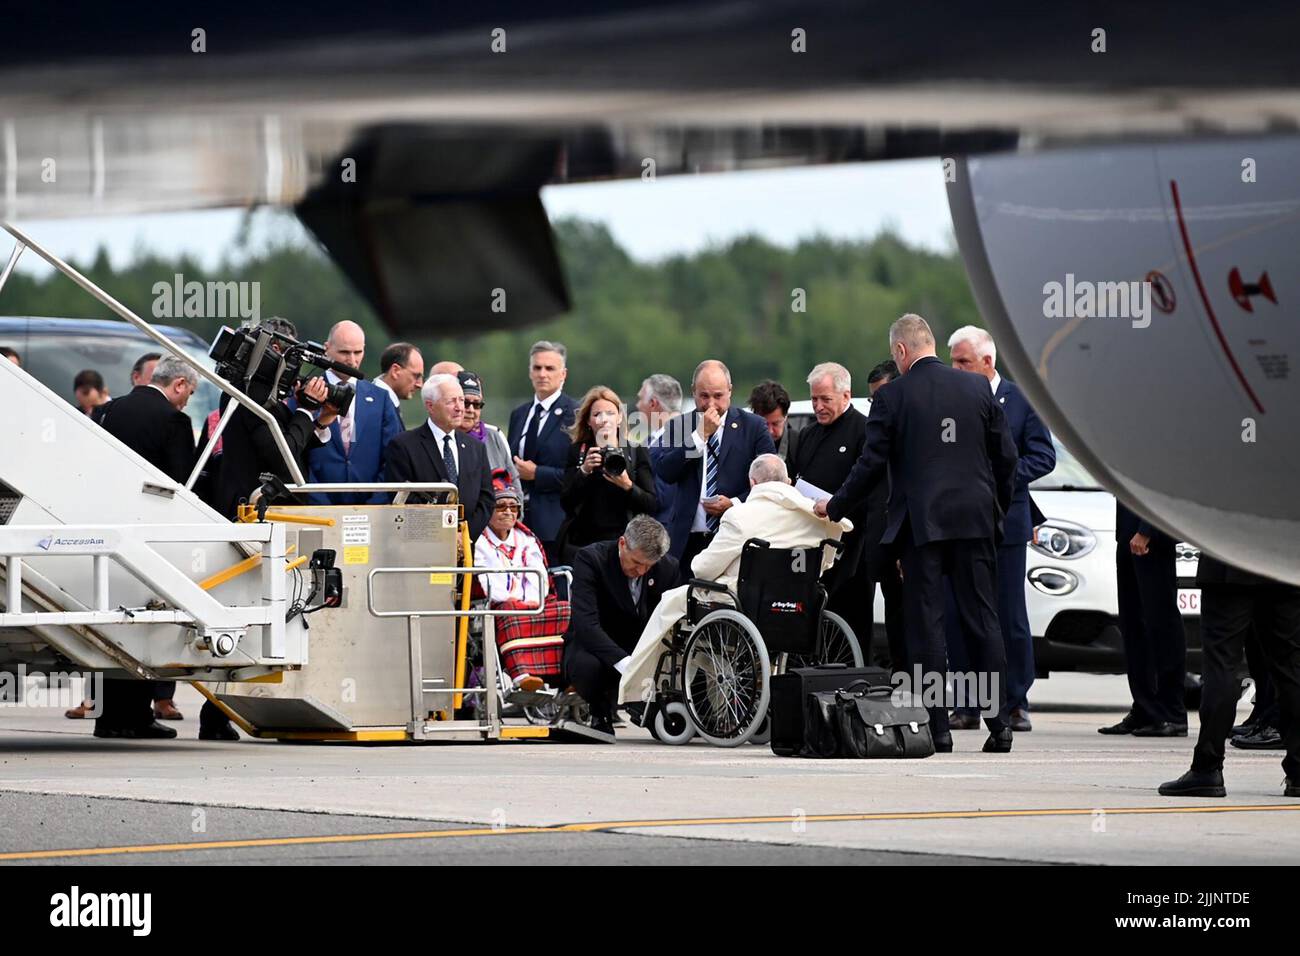 Quebec, Canada. 26th July, 2022. Pope Francis sits in a wheelchair after arriving by plane at the airport in Quebec. As part of his six-day trip to Canada, Pope Francis plans to celebrate Mass at the National Shrine and meet church representatives in Quebec City this Thursday. Credit: Johannes Neudecker/dpa/Alamy Live News Stock Photo